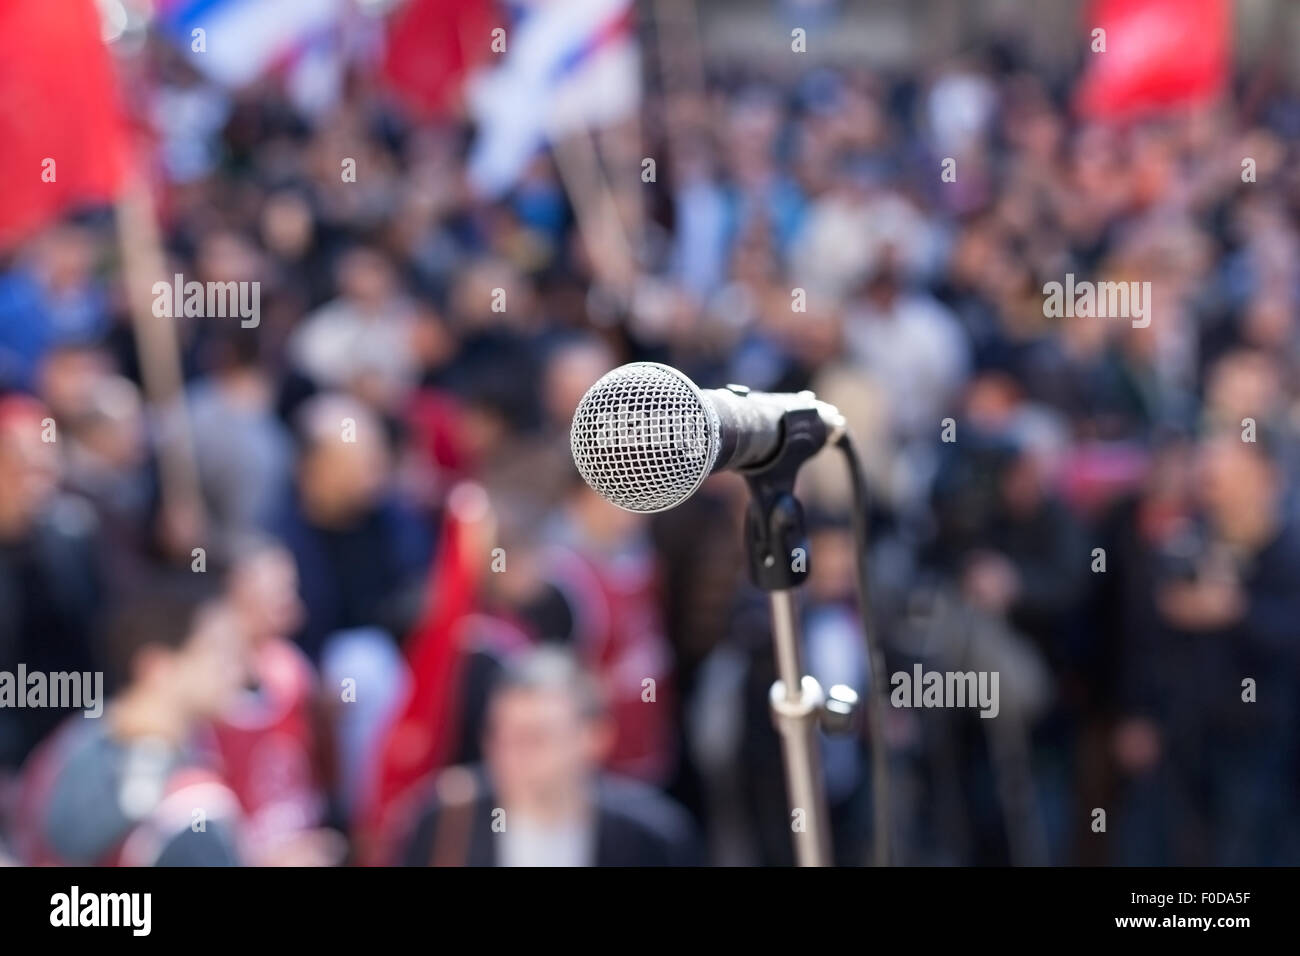 Microphone in focus against blurred audience Stock Photo